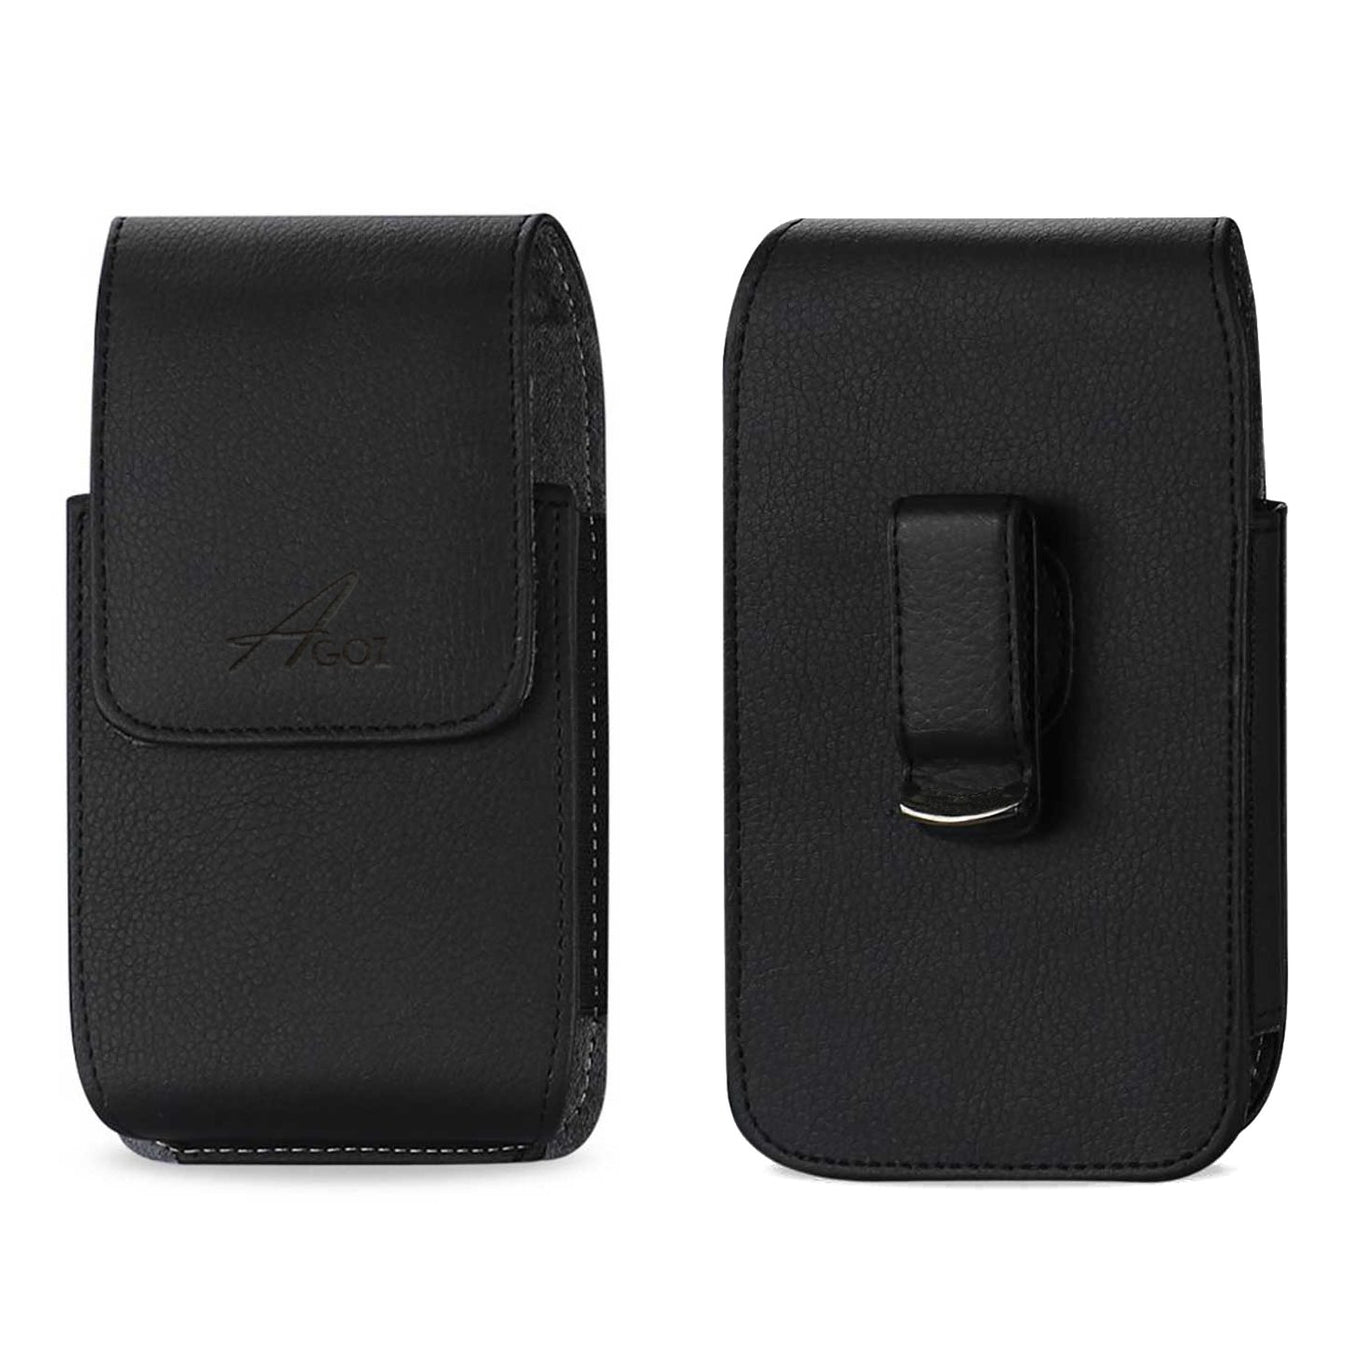 Alcatel SmartFlip Leather Canvas Rugged Case Holster Pouch